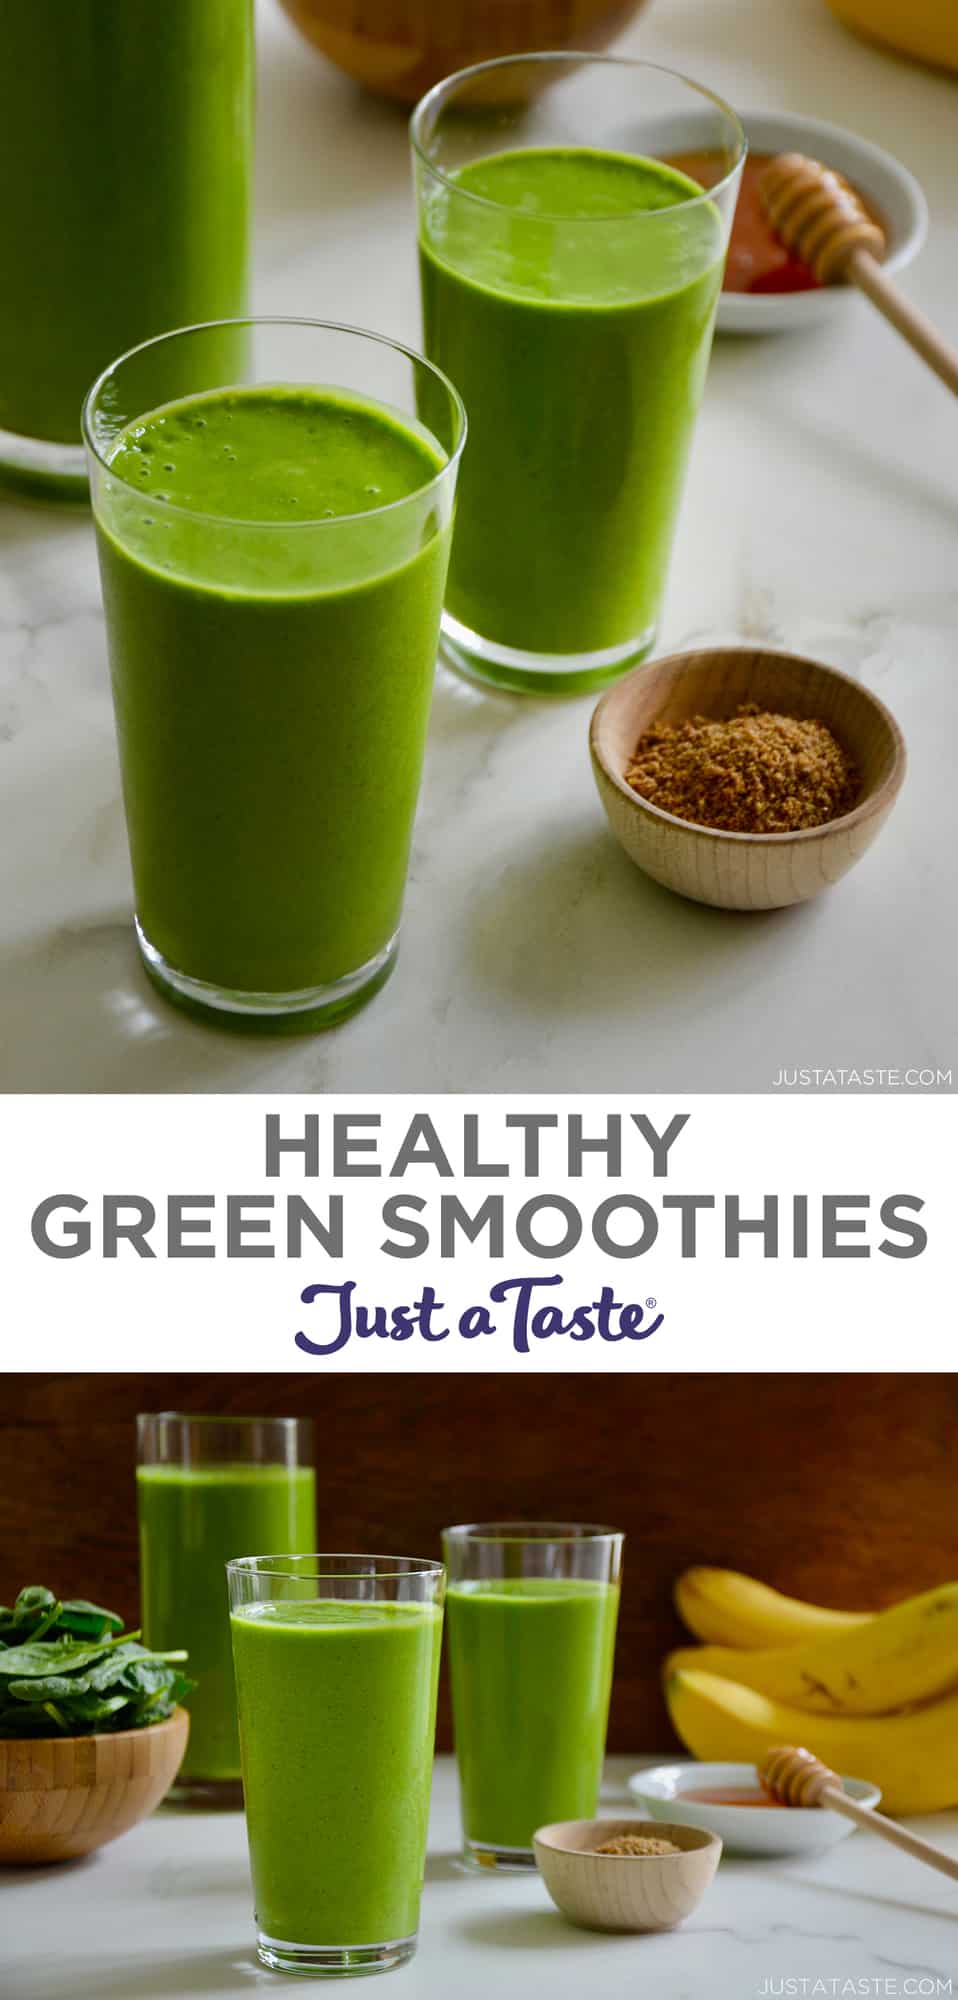 Healthy Green Smoothies - Just a Taste